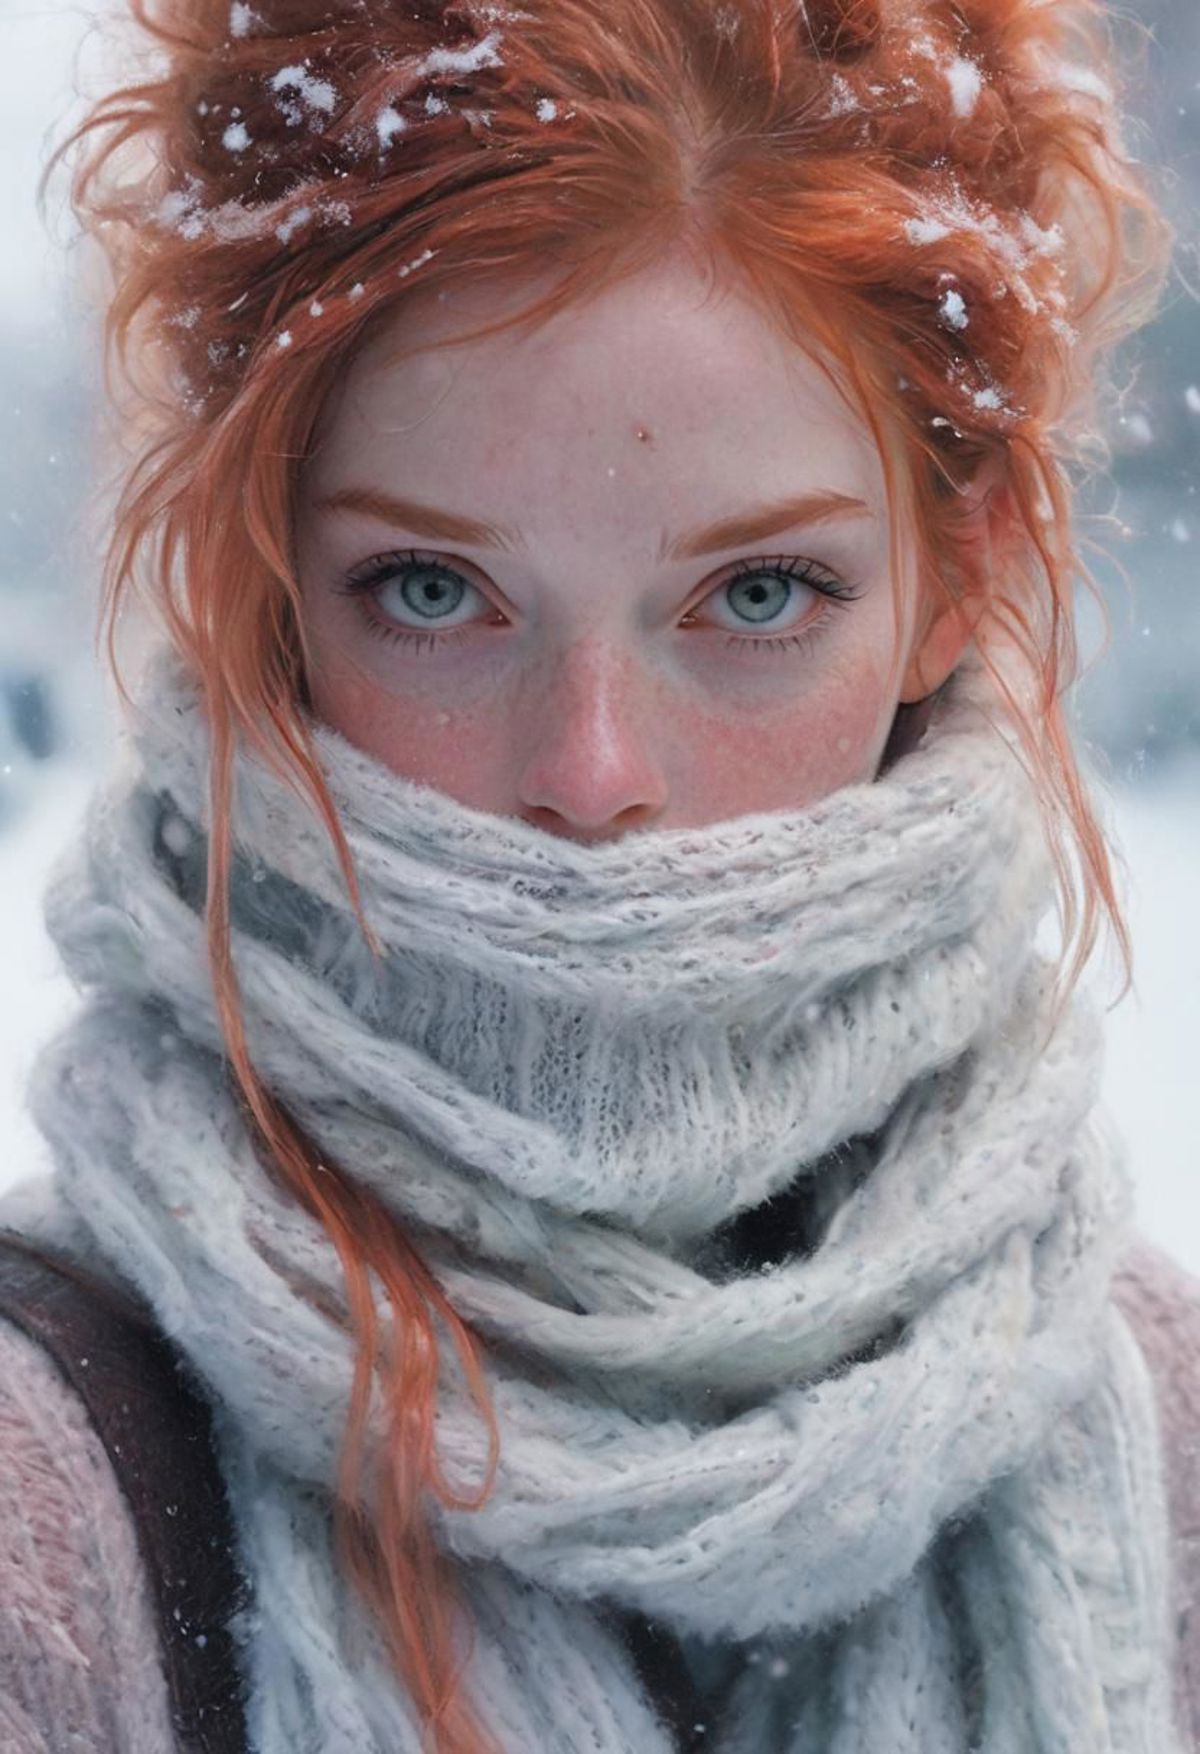 A woman with red hair and blue eyes wearing a white scarf.